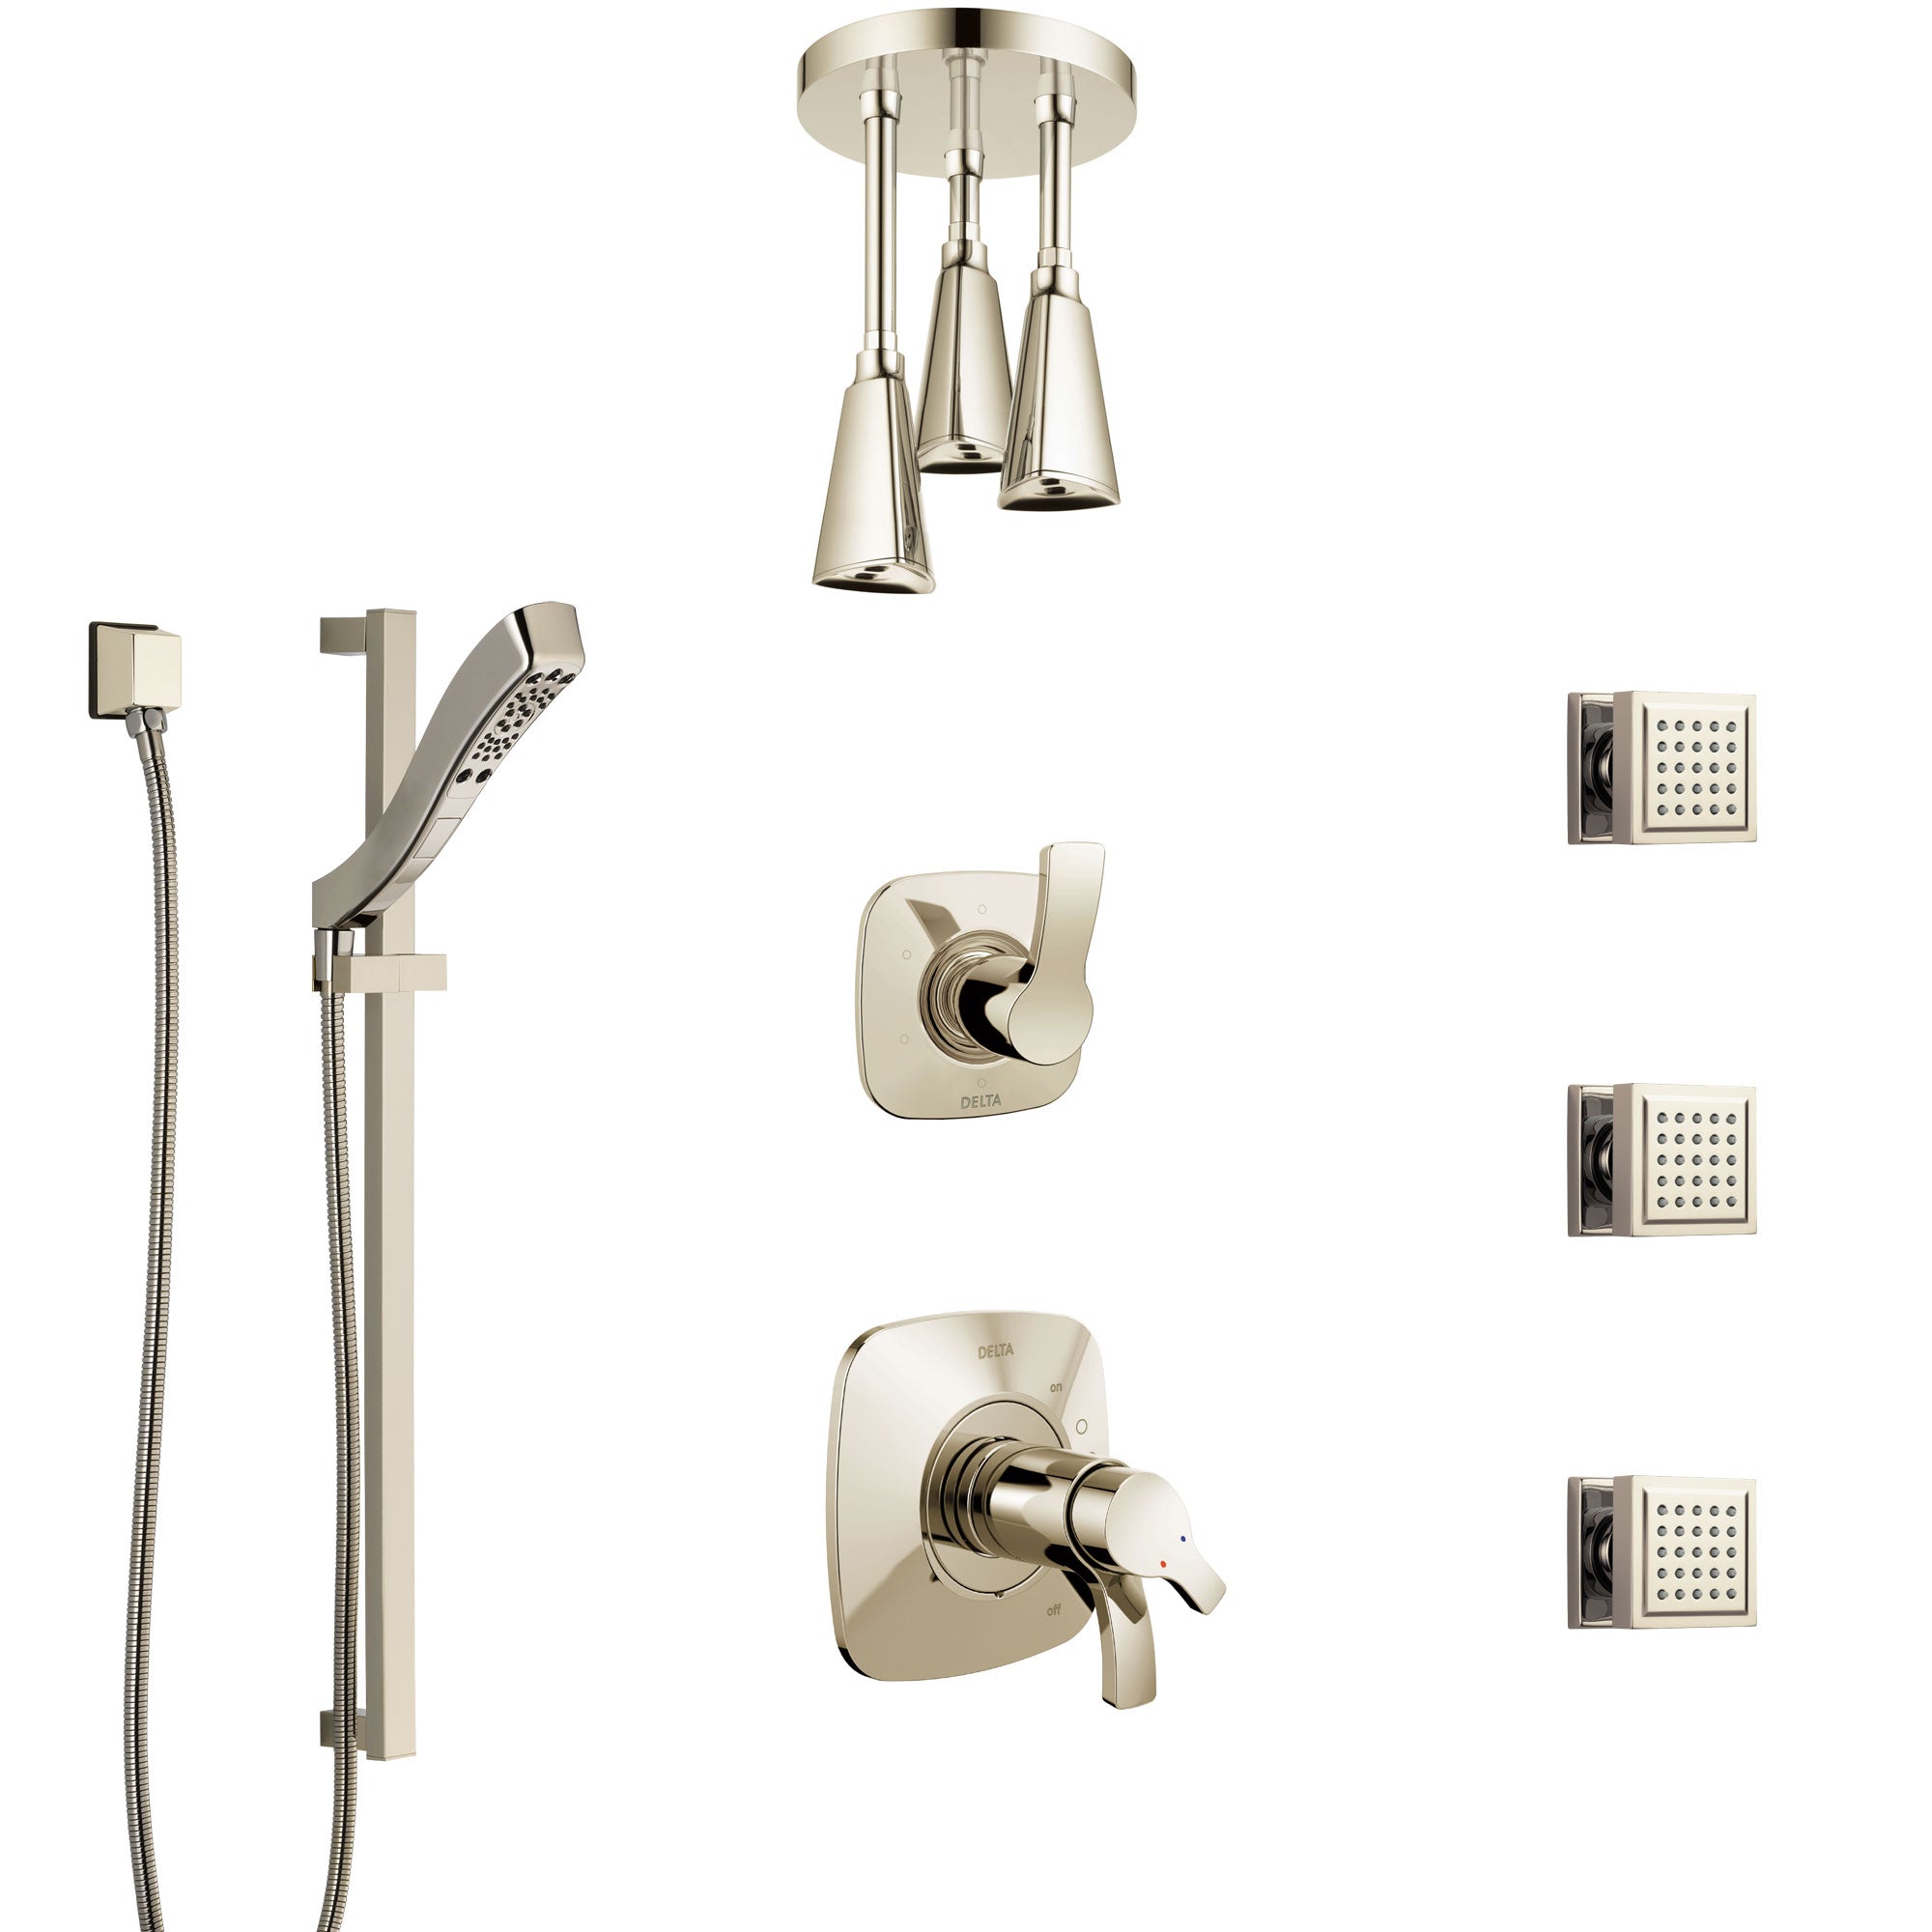 Delta Tesla Polished Nickel Shower System with Dual Thermostatic Control, Diverter, Ceiling Showerhead, 3 Body Sprays, and Hand Shower SS17T521PN1